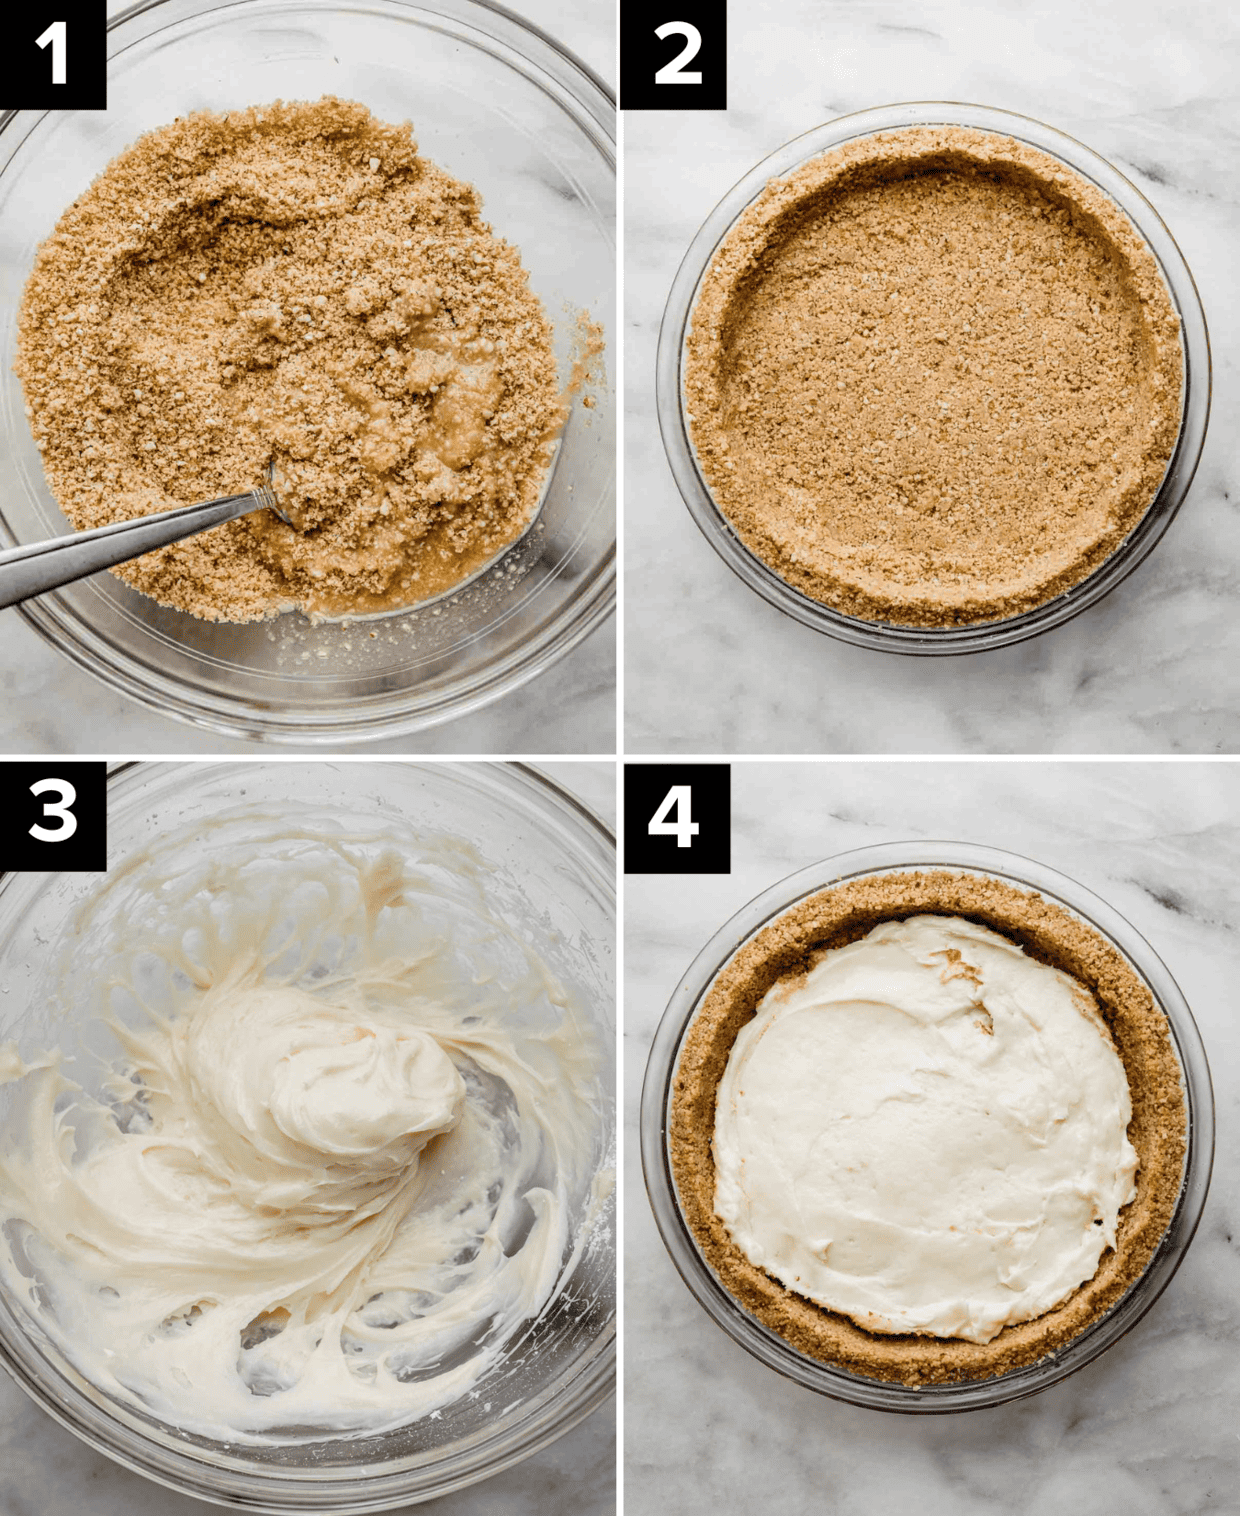 Four images showing how to make the beginnings of a Possum Pie; TL photo is crushed shortbread and pecans in bowl, TR image is a shortbread pecan pie crust, BL image is cream cheese mixture in glass bowl, BR image is cream cheese layer in a pie crust.